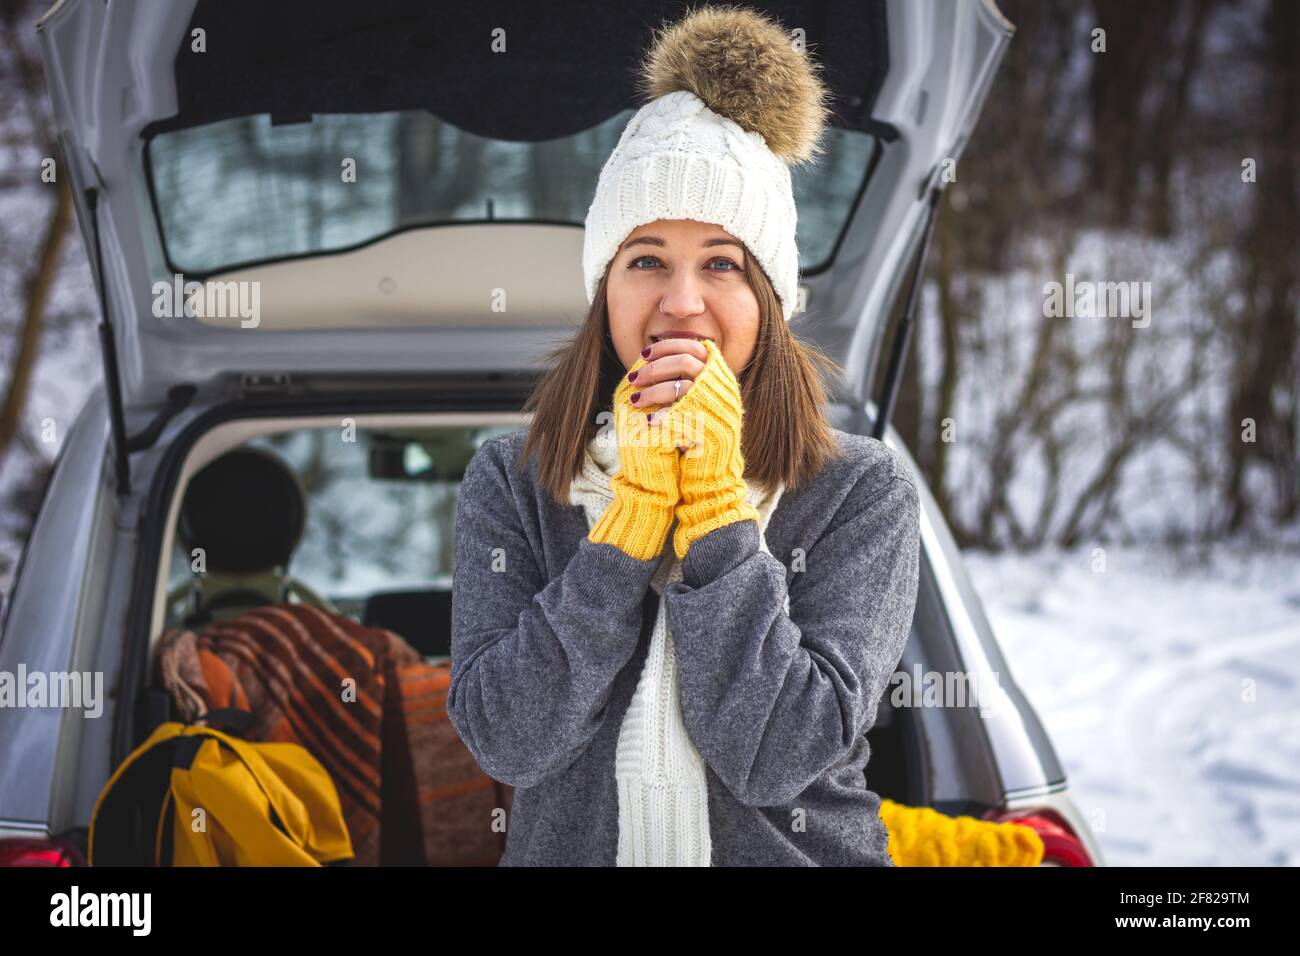 Young woman with knit hat warming up herself next to car during travel to winter vacation. Caucasian woman standing at outdoor parking lot. Road trip Stock Photo